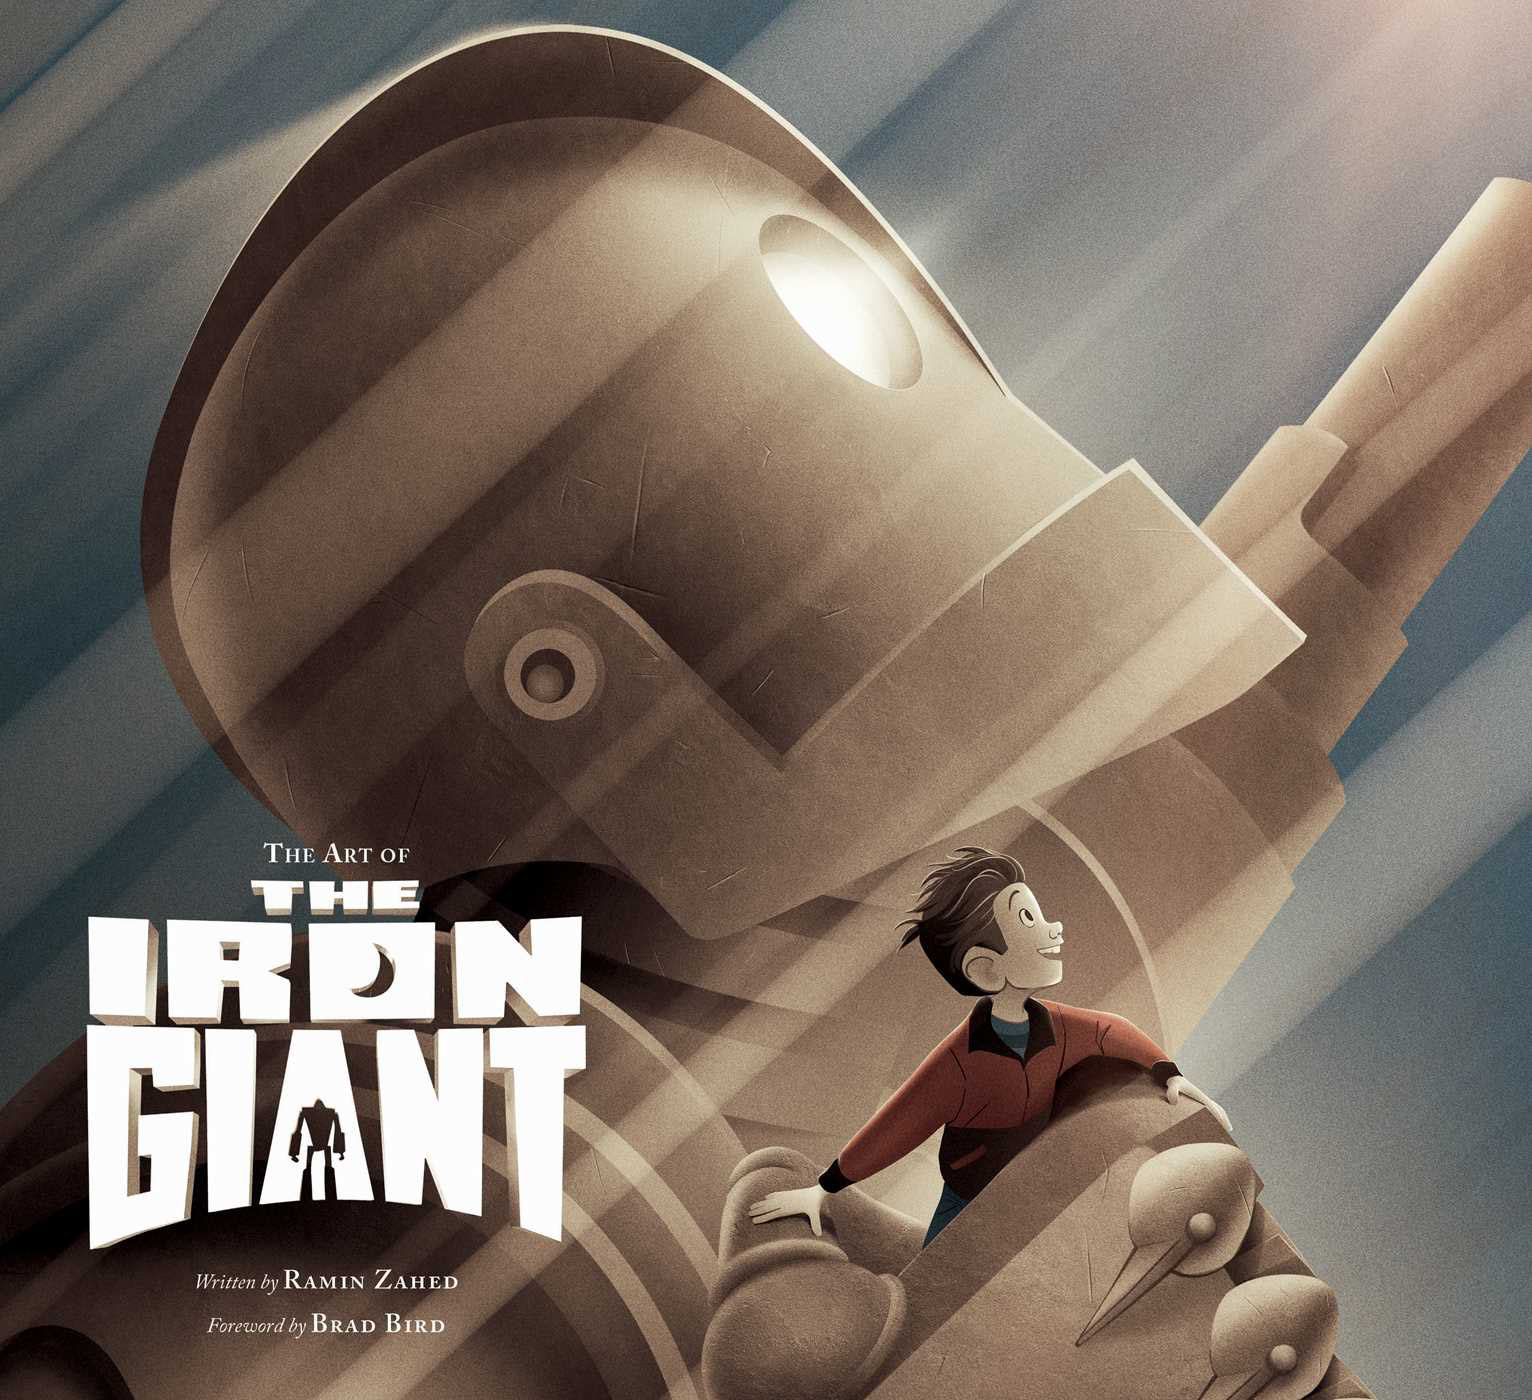 Cover for “The Art of the Iron Giant”